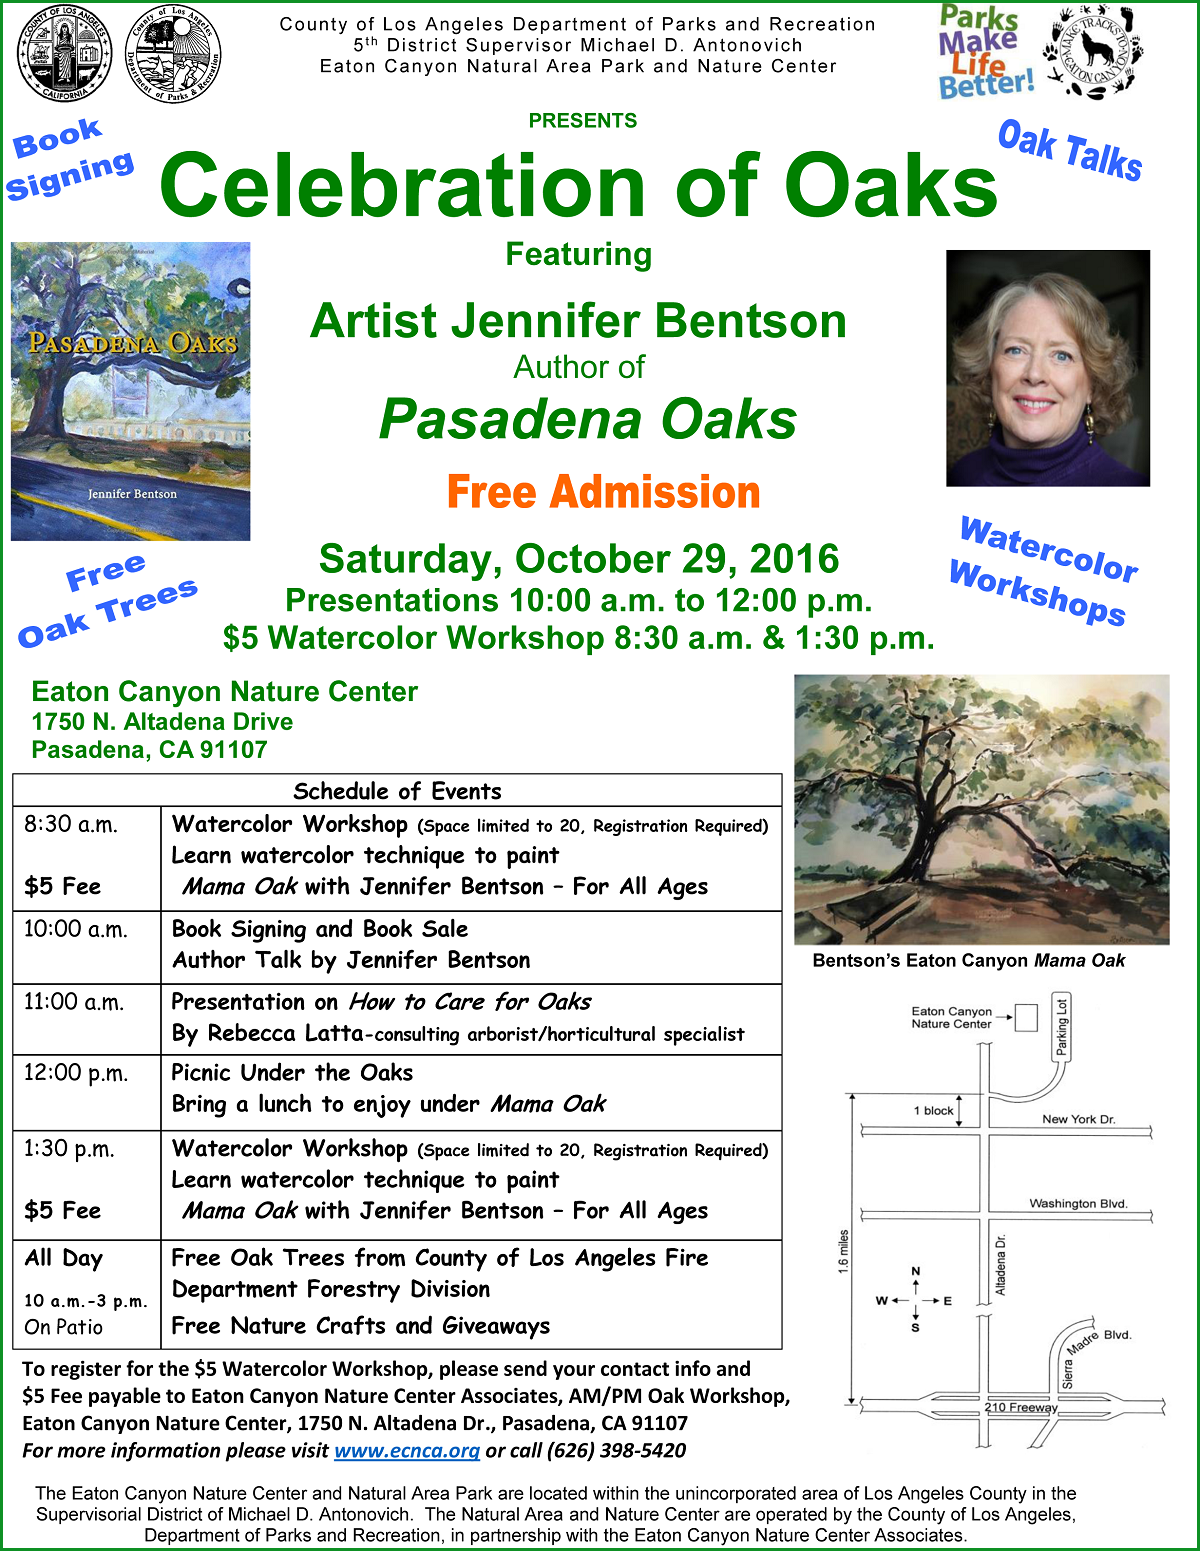 Eaton Canyon Nature Center Celebrates Oak Trees with A Community Event Featuring Local Artist Jennifer Bentson